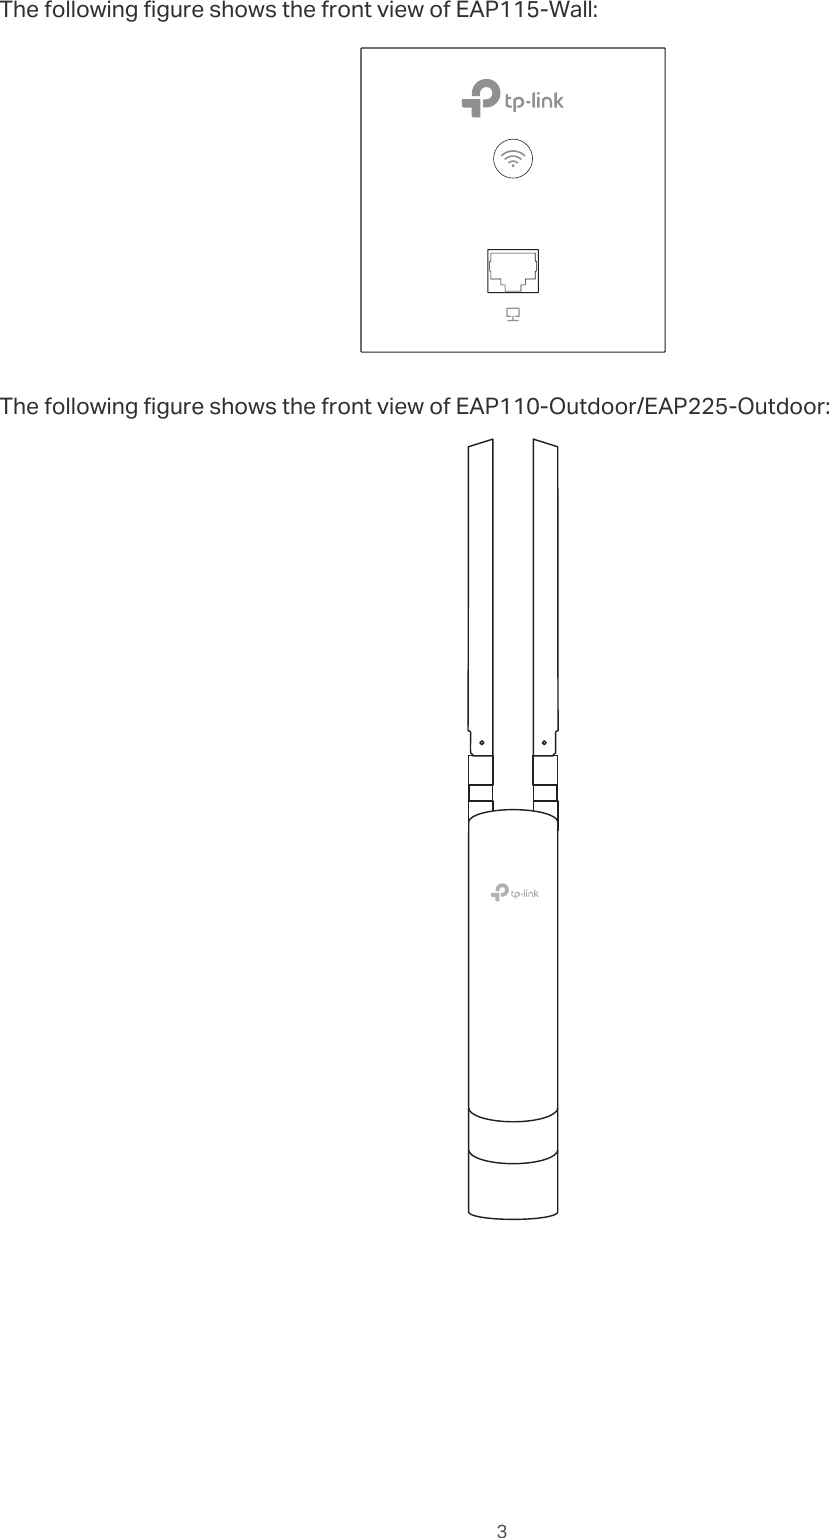  3The following figure shows the front view of EAP115-Wall:The following figure shows the front view of EAP110-Outdoor/EAP225-Outdoor: